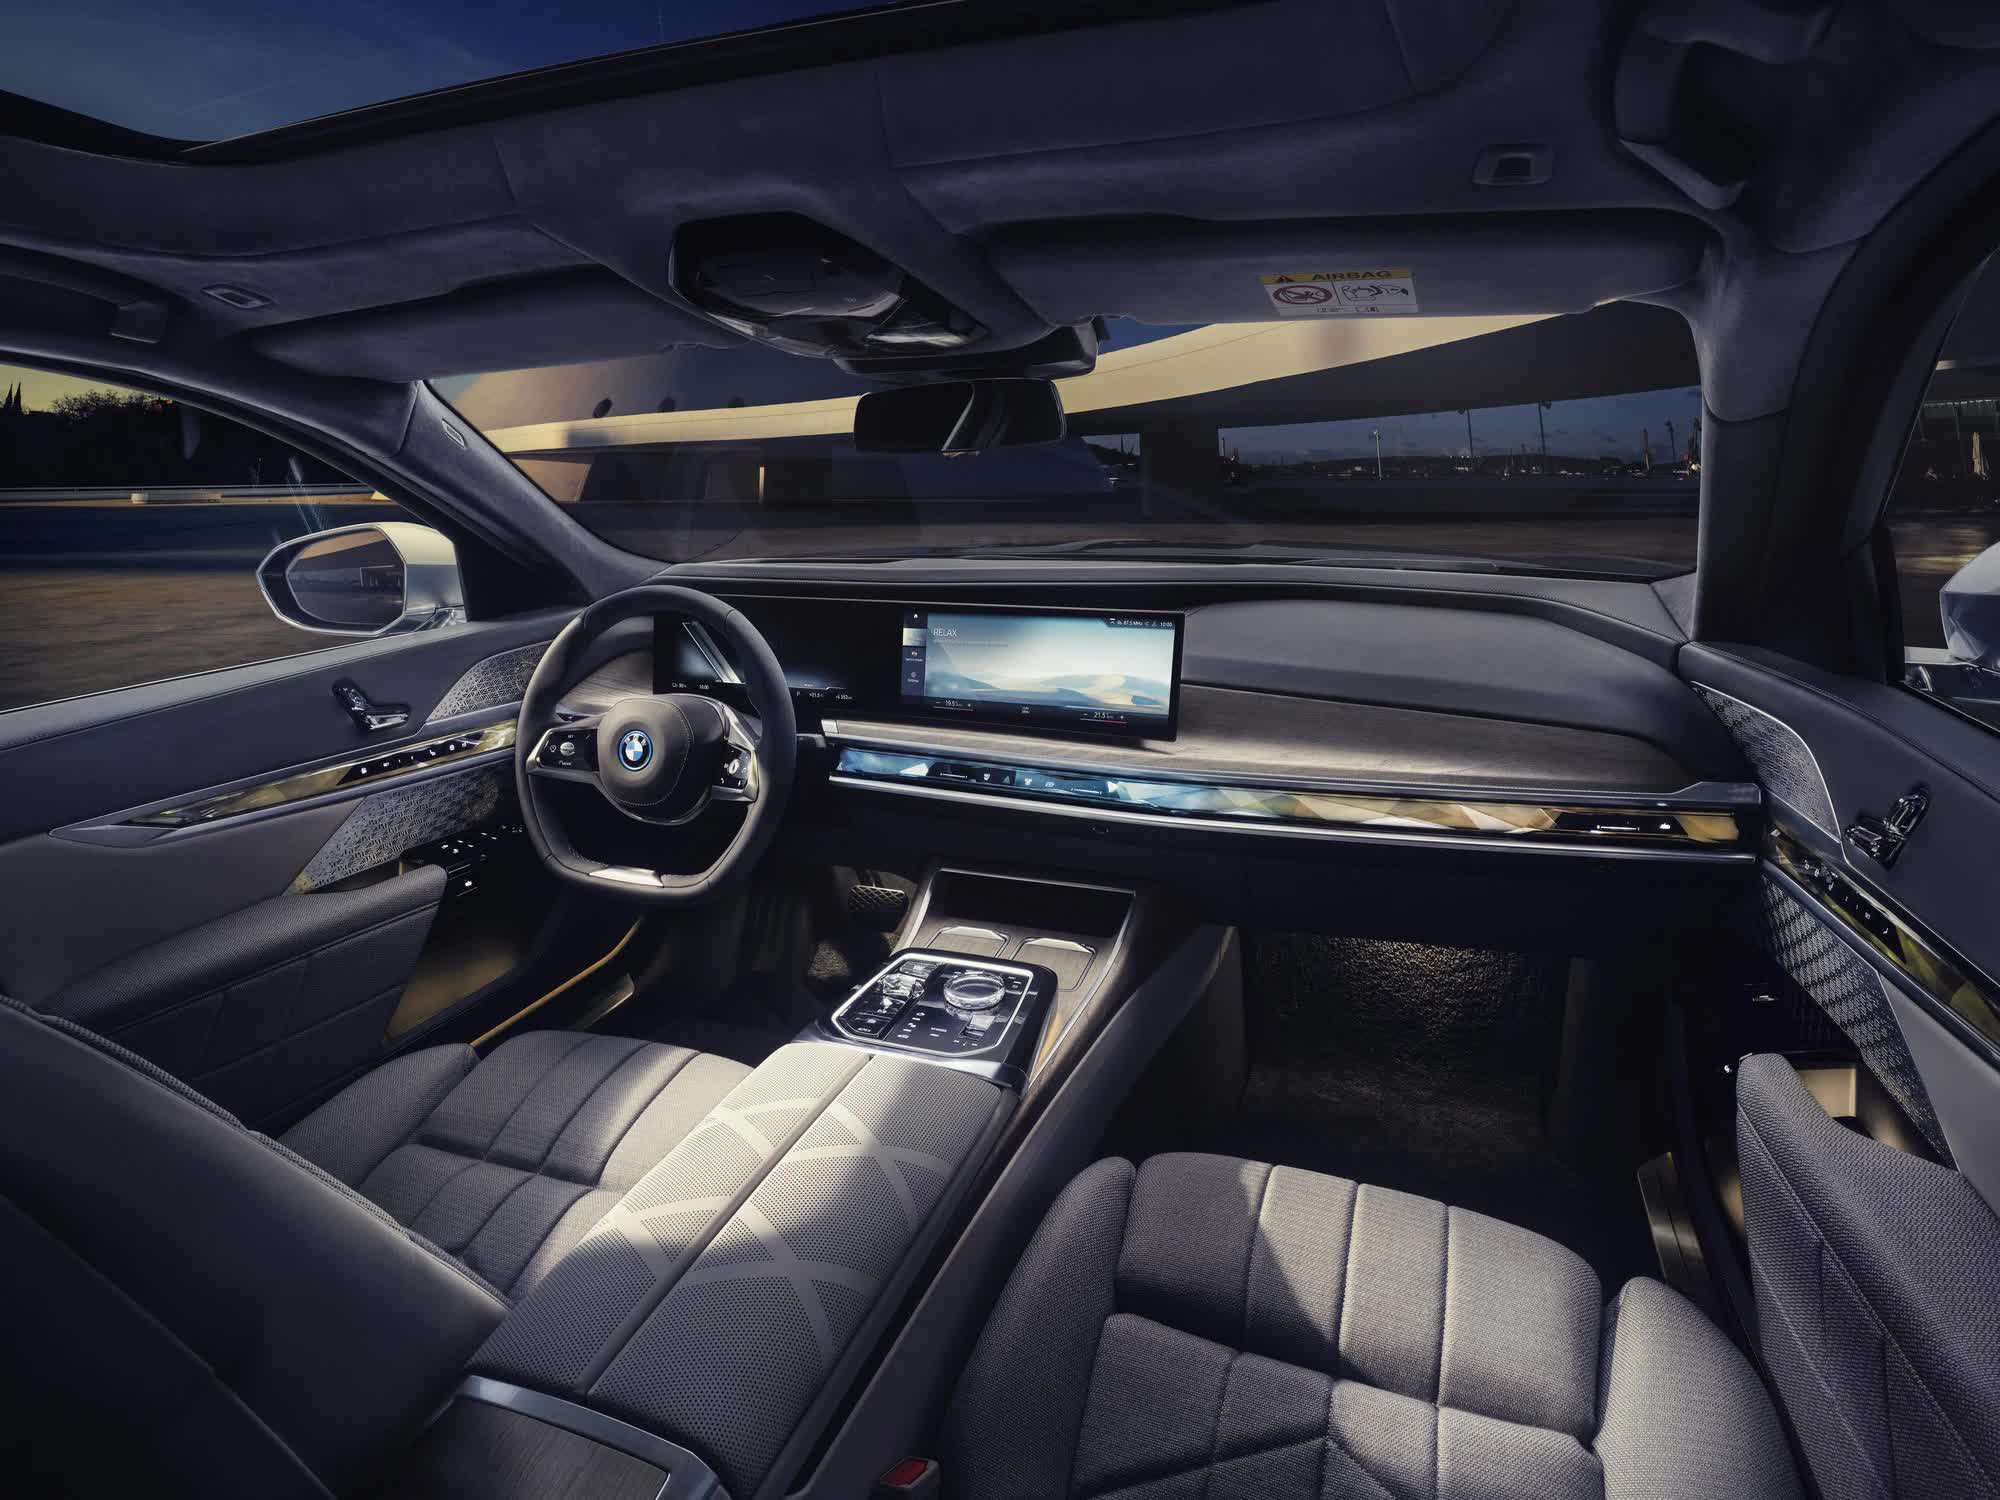 Huawei AppGallery equipped in new BMW 7 series cars - Huawei Central